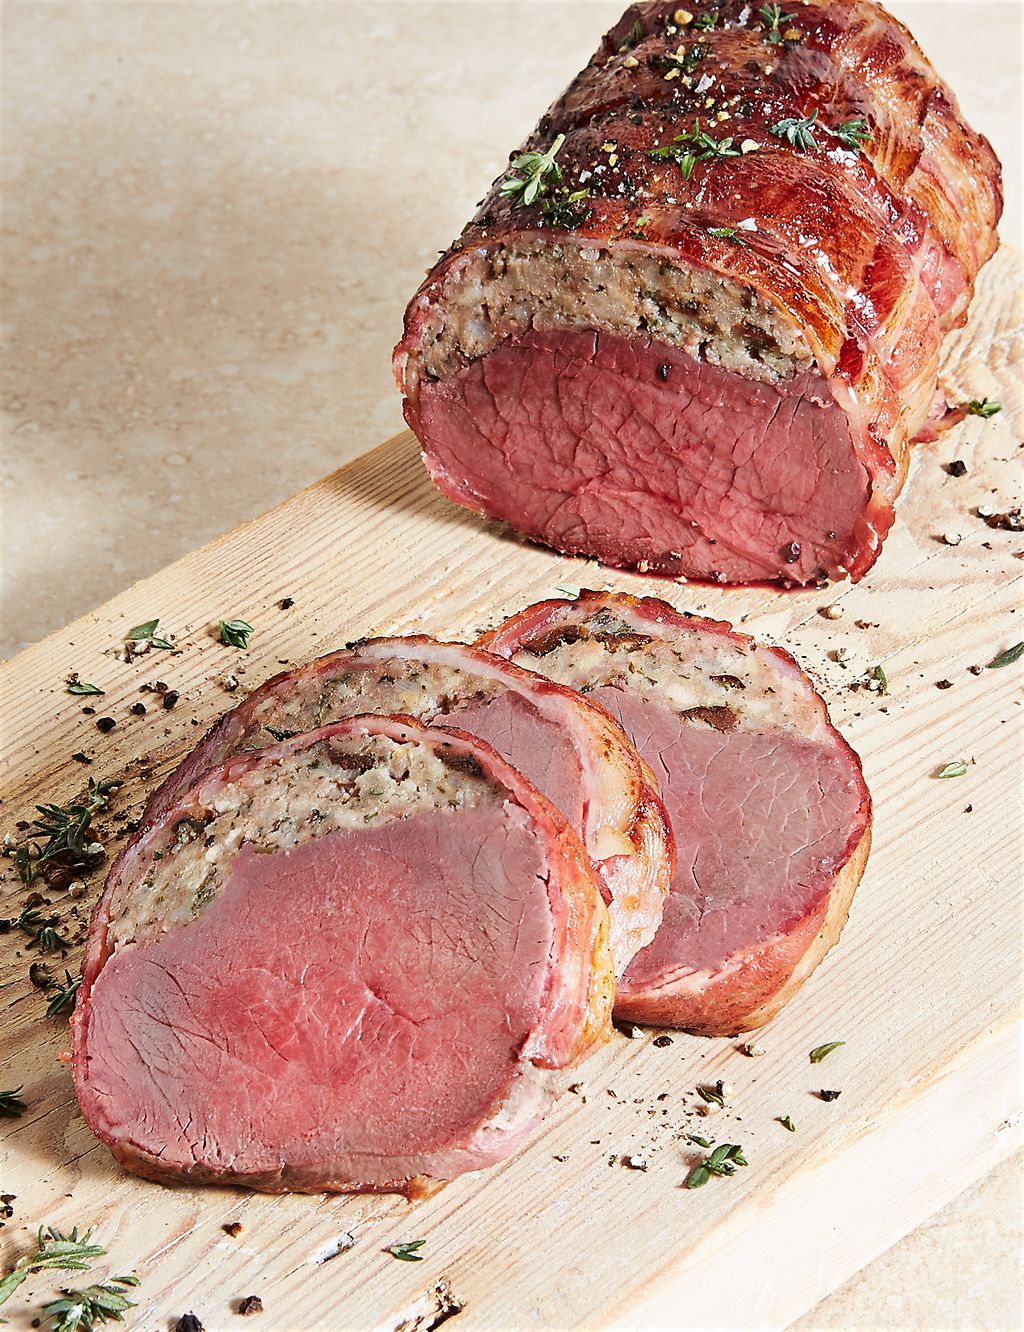 Bacon Wrapped Venison with Plum & Sloe Gin Stuffing (Serves 4) 1 of 1